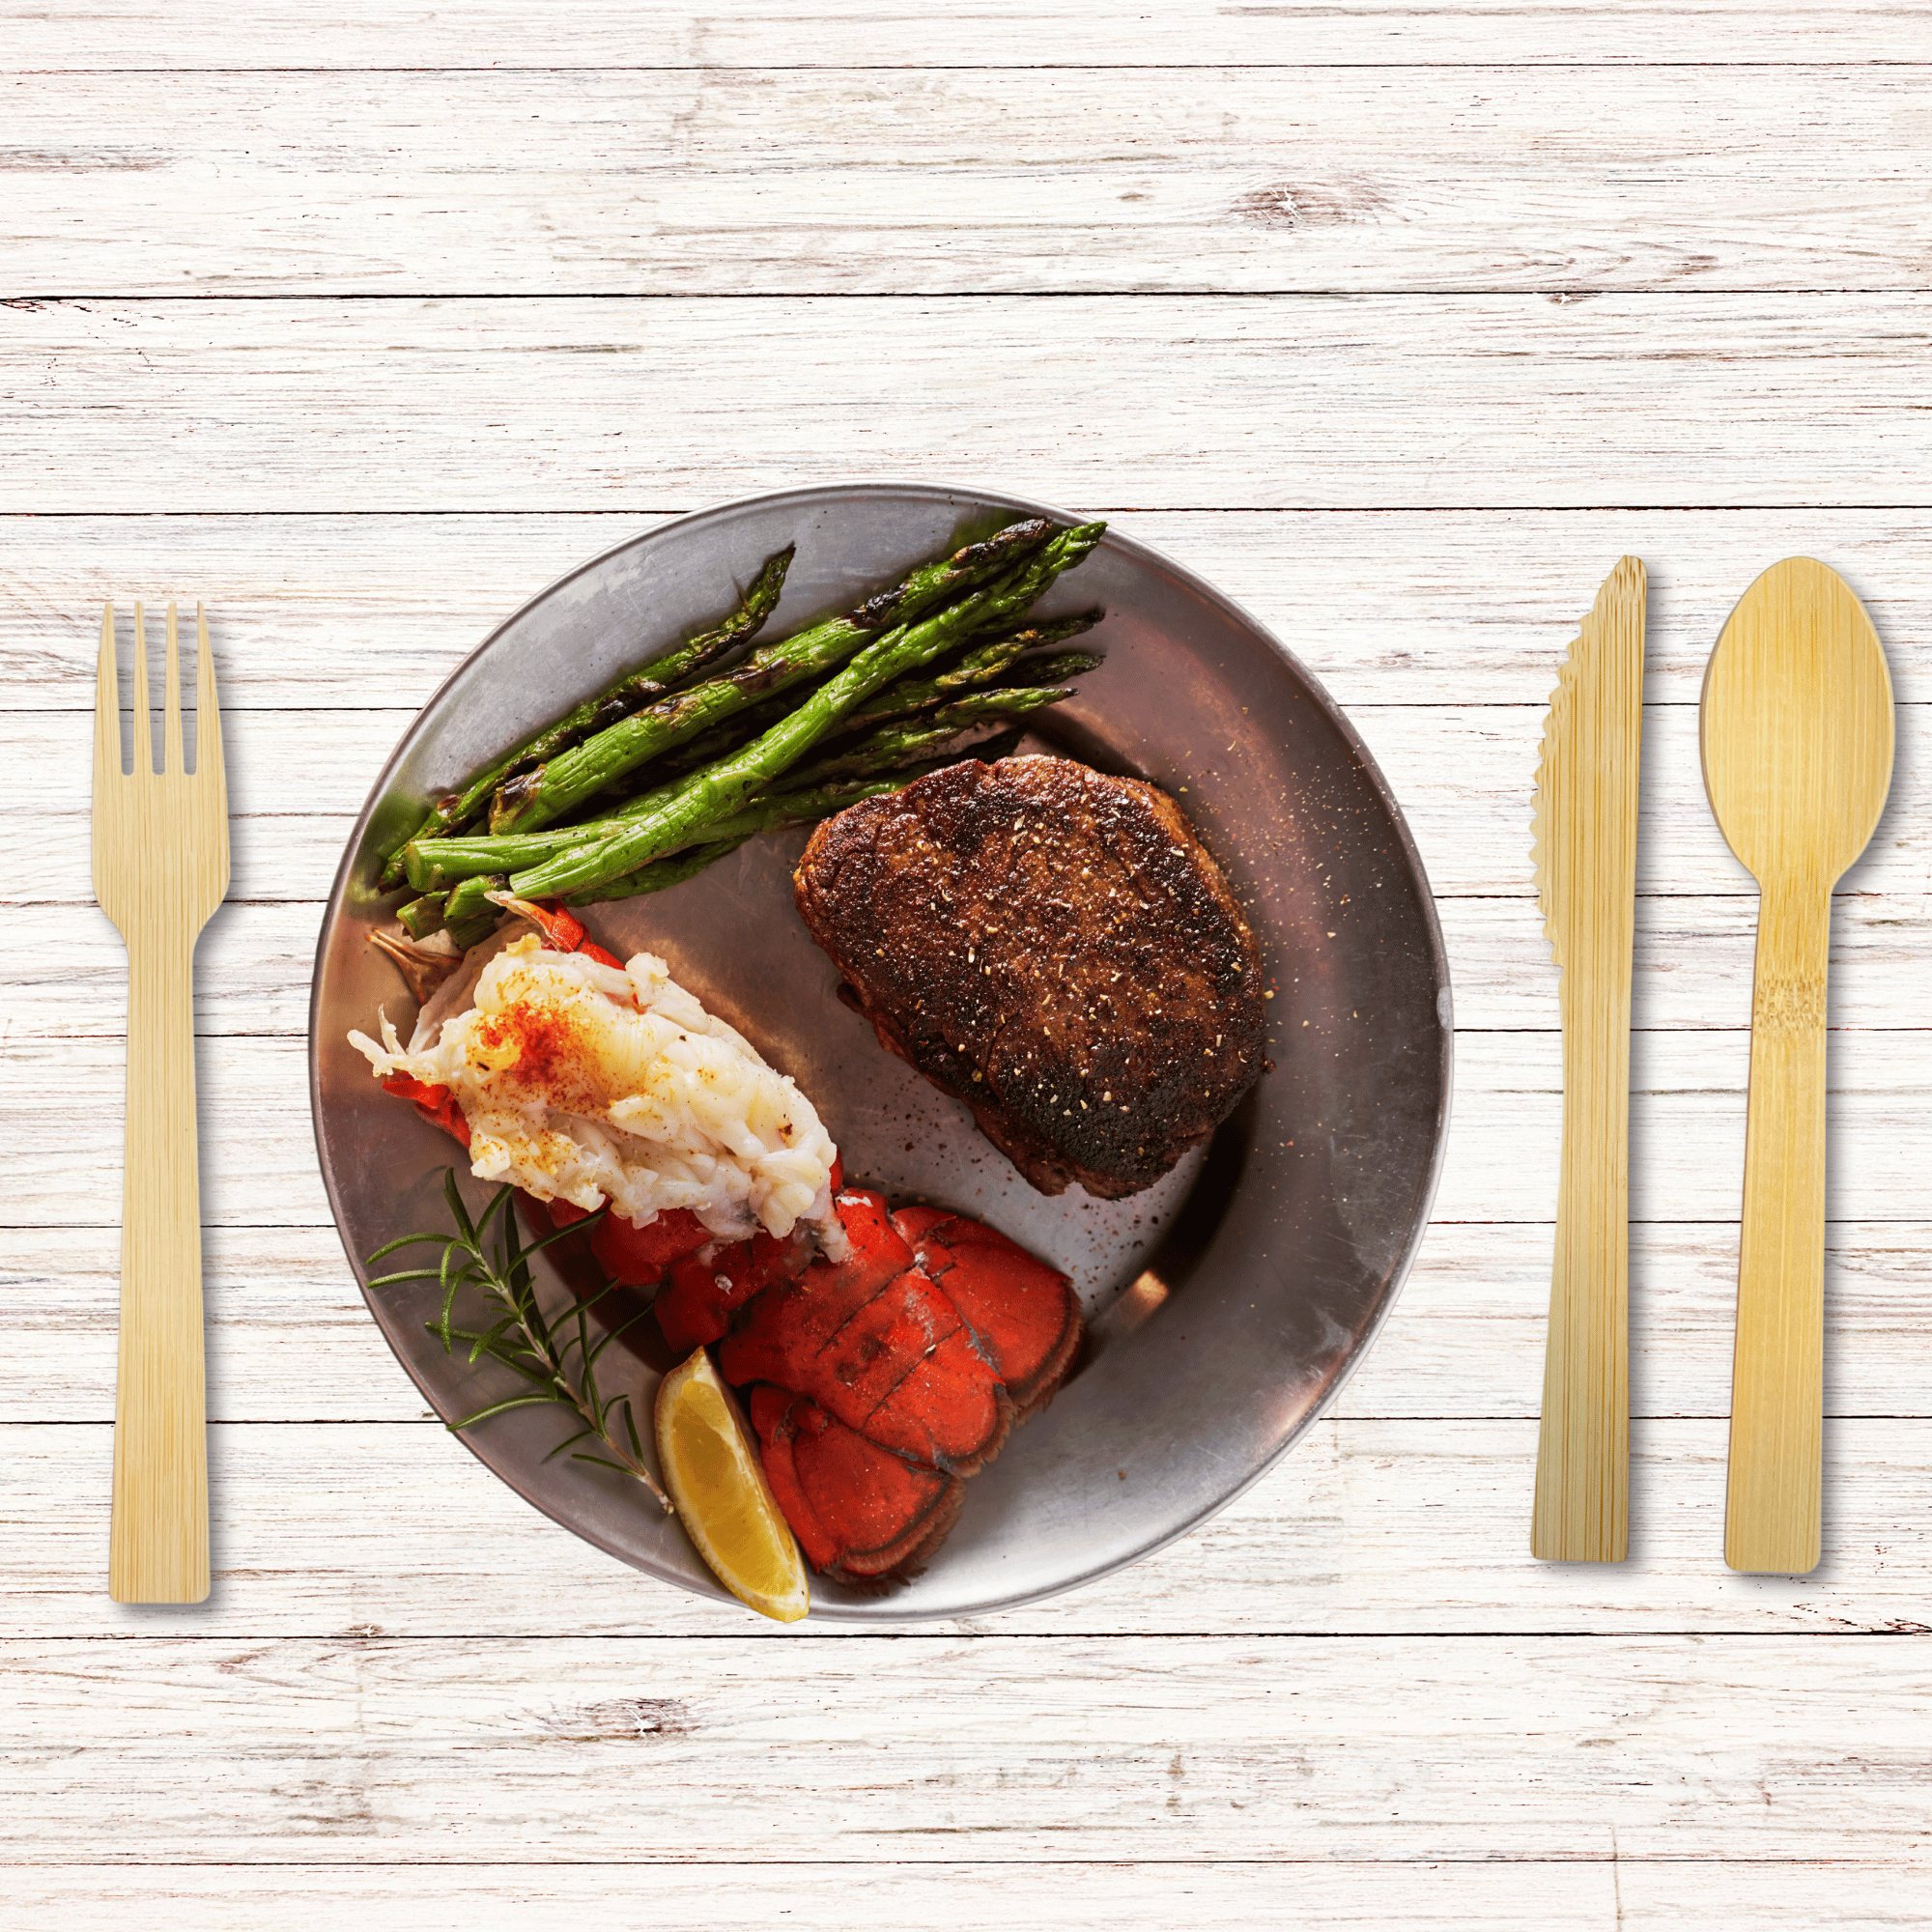 An elegant dinner setting featuring Holy City Straw Co. brand eco-friendly wooden cutlery, with a fork to the left and knife and spoon to the right. The meal includes a well-seasoned steak, succulent lobster tail, a scoop of creamy crab meat, and a side of grilled asparagus, all artistically arranged on a round plate with a rustic wooden table background